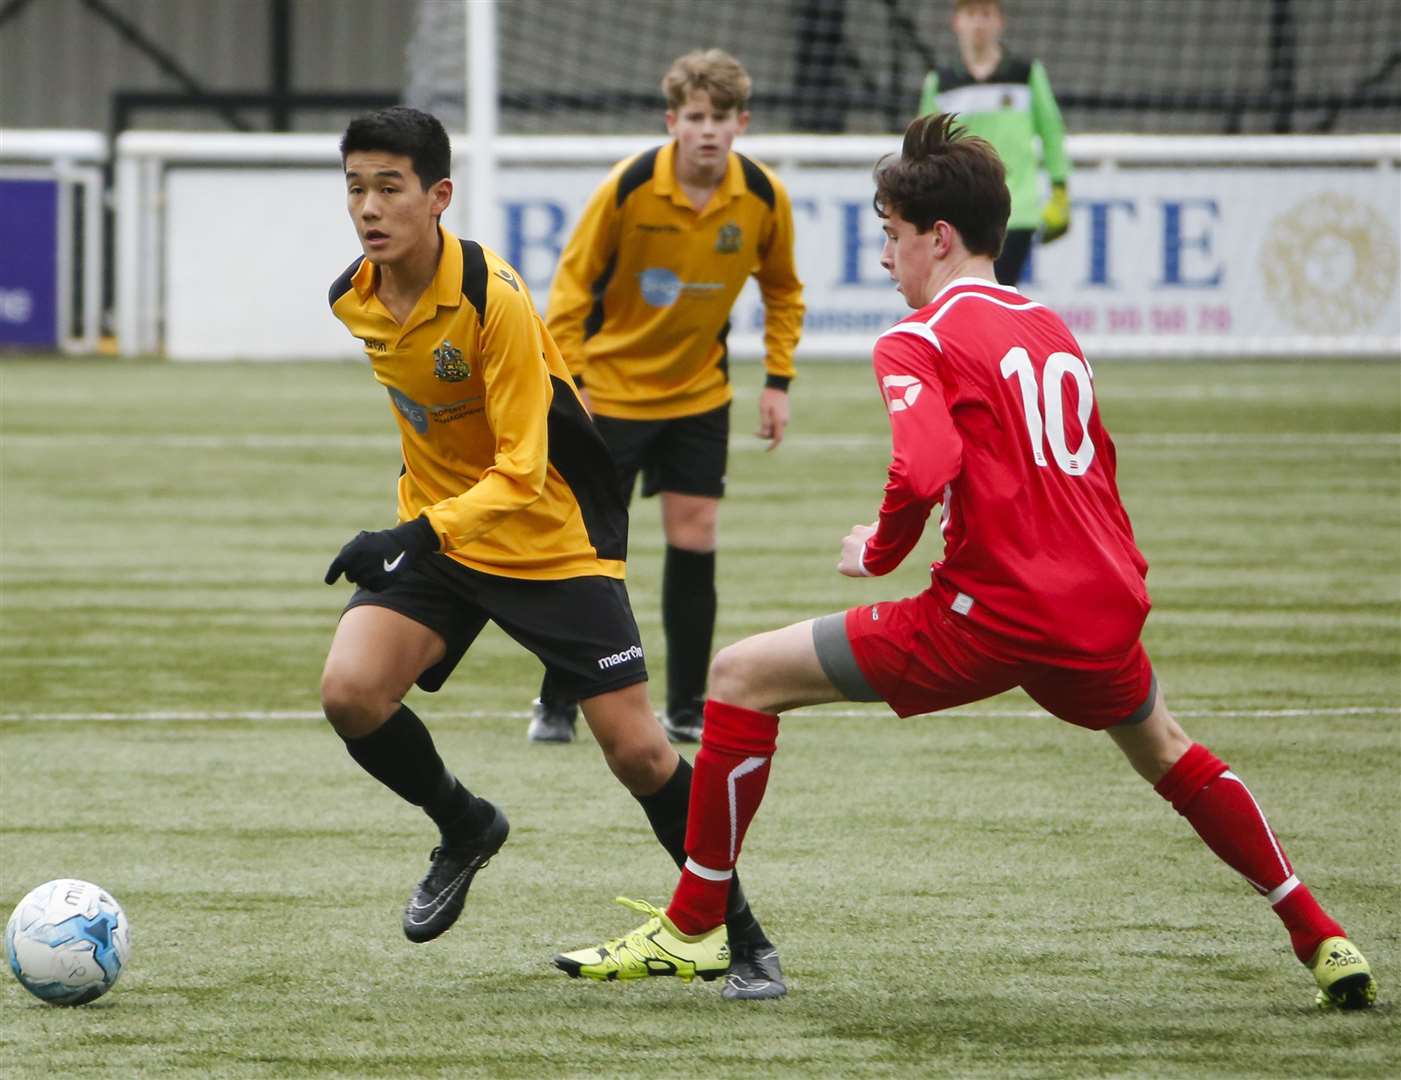 Bivesh Gurung came through the youth ranks at Maidstone before joining Crystal Palace Picture: Martin Apps